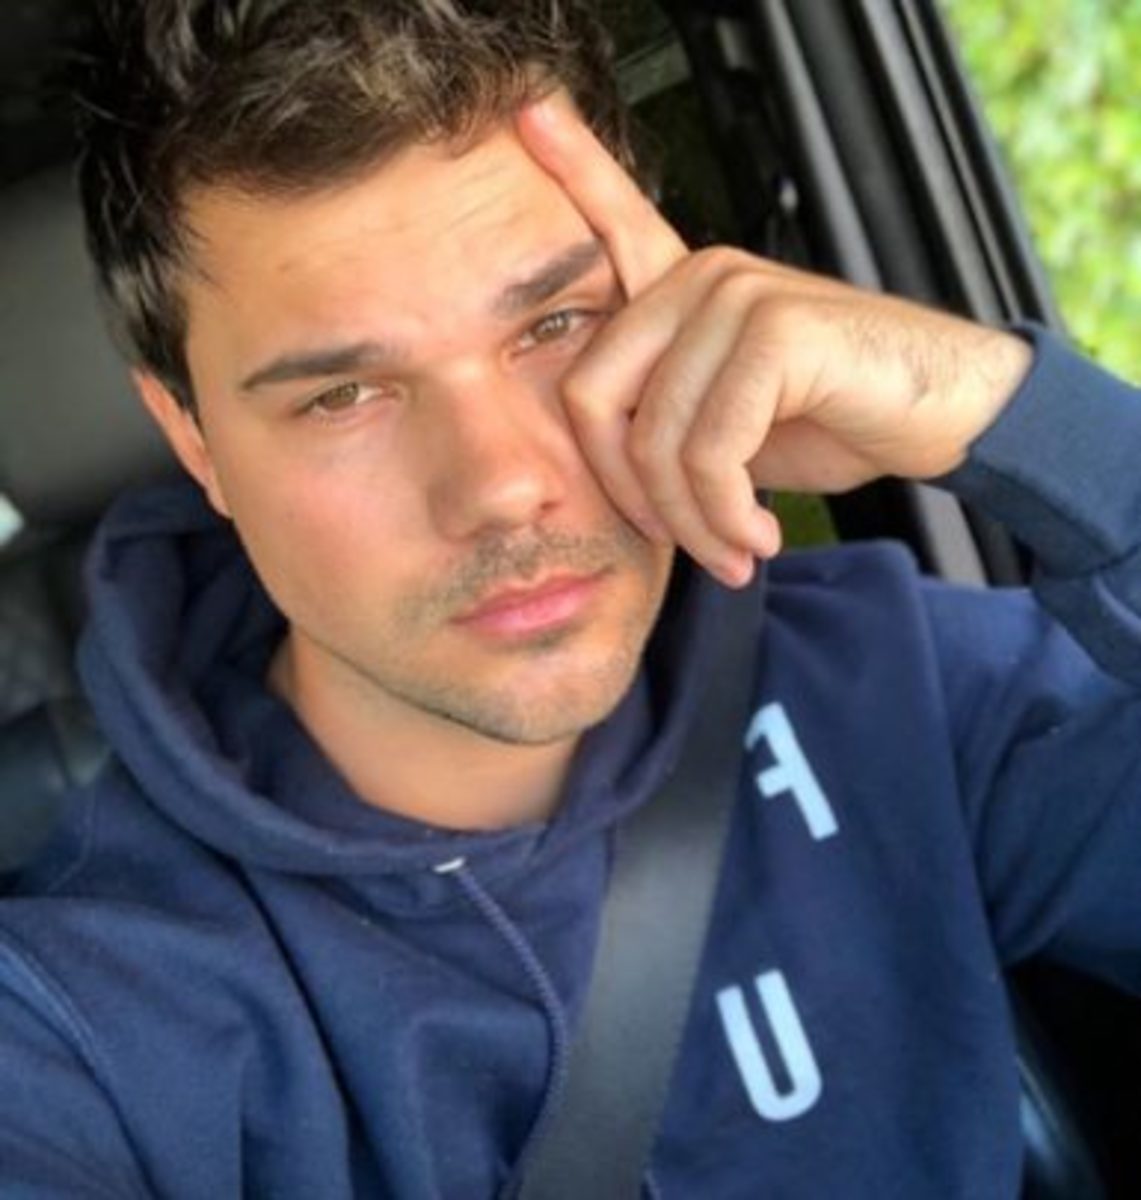 Taylor Lautner in the car